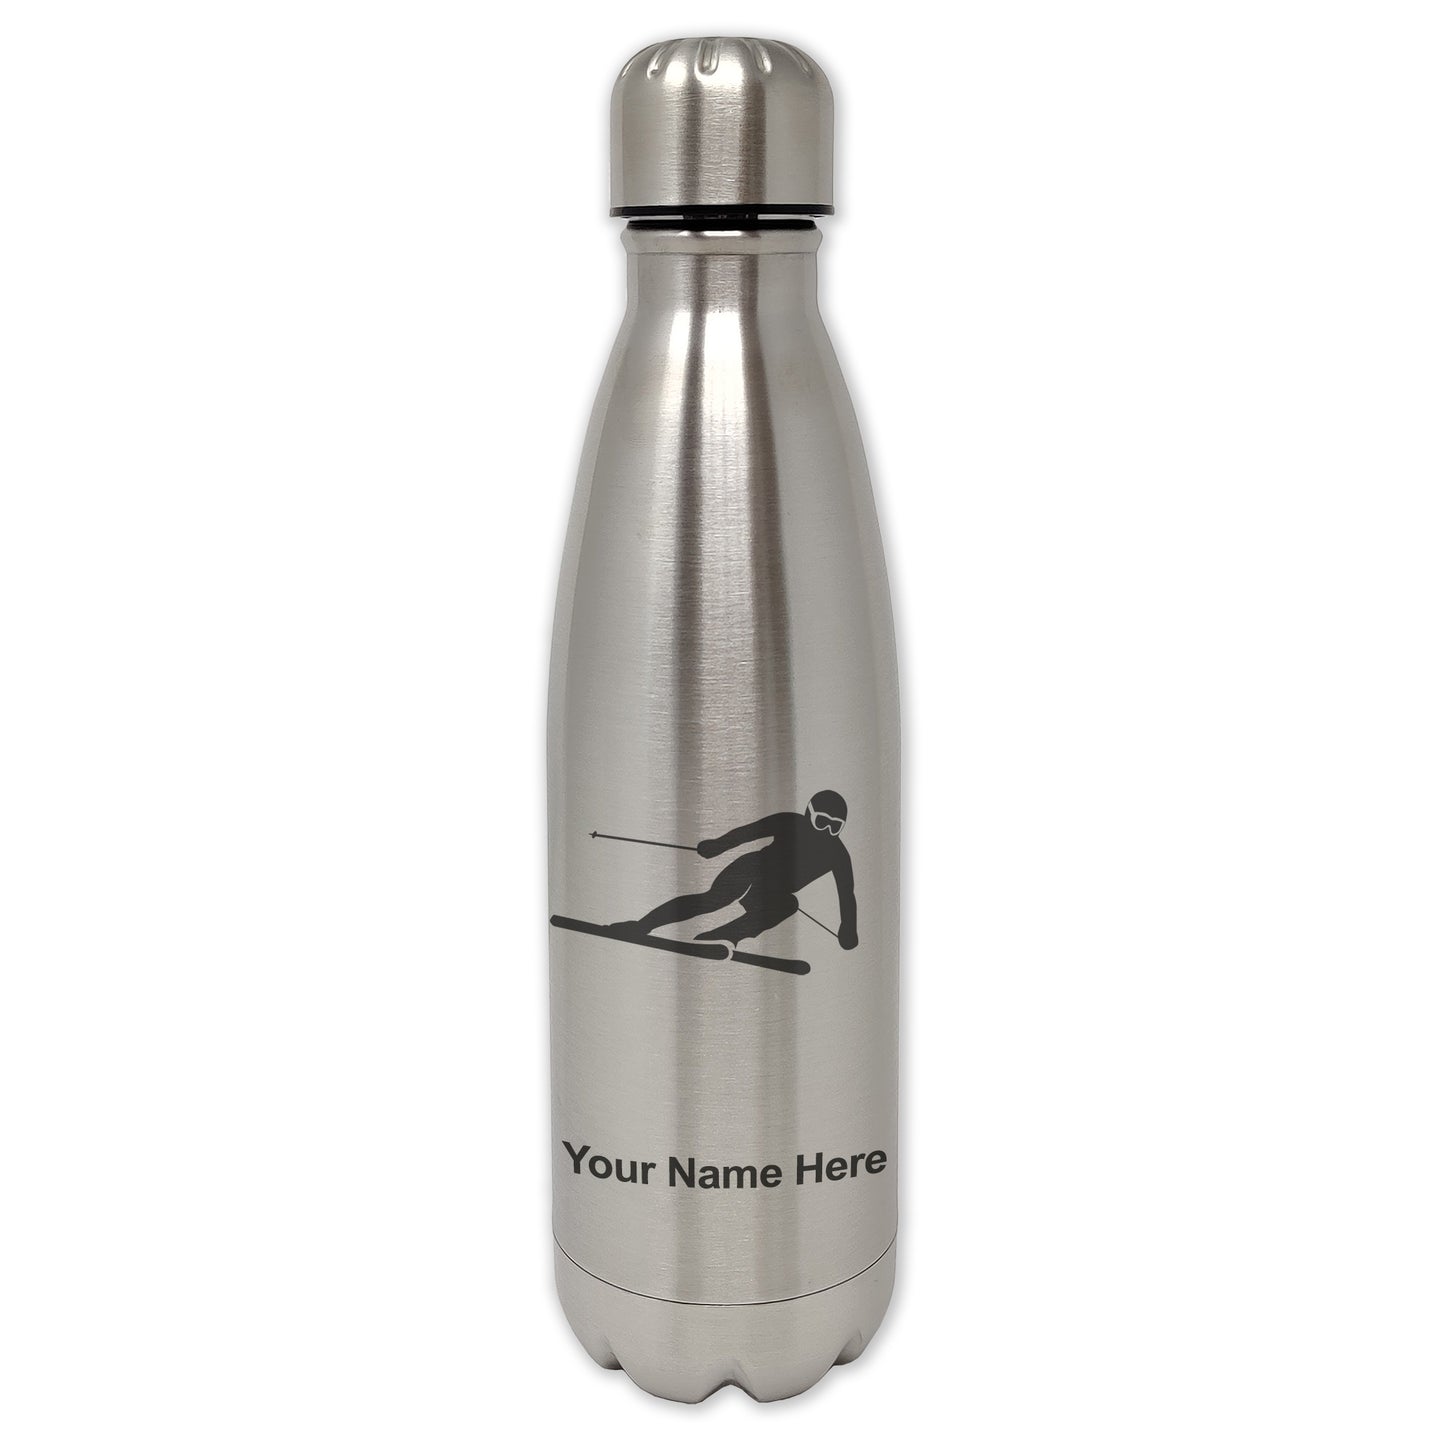 LaserGram Single Wall Water Bottle, Skier Downhill, Personalized Engraving Included